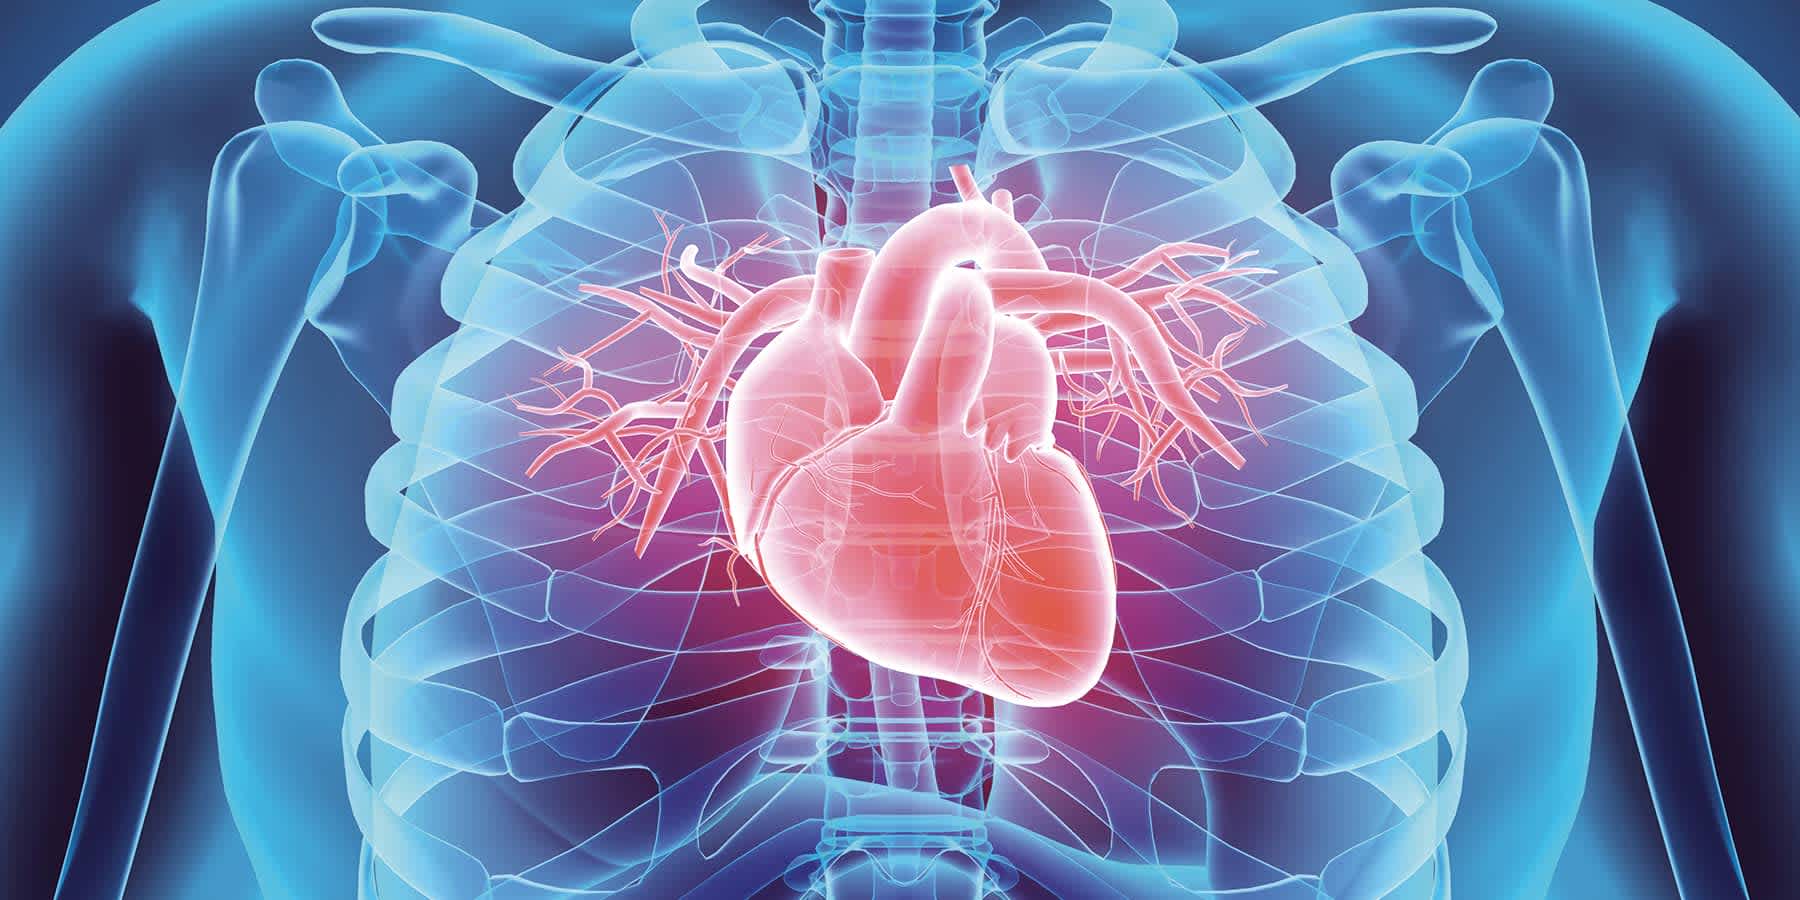 Illustration of anatomical heart in a person using a fitness tracker to improve heart health